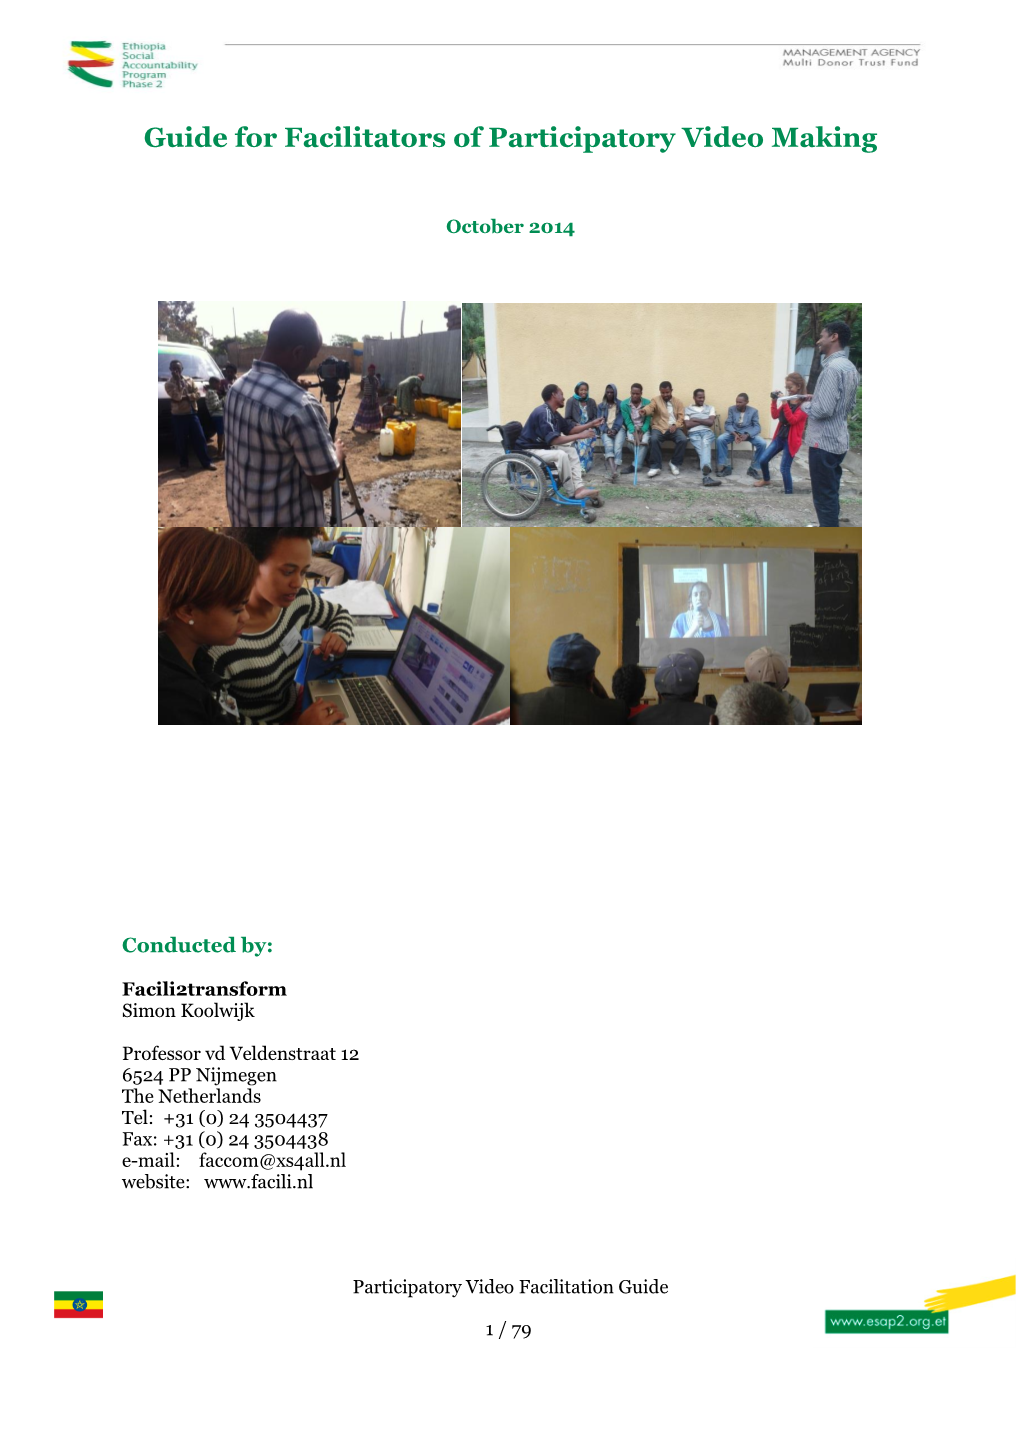 Guide for Facilitators of Participatory Video Making